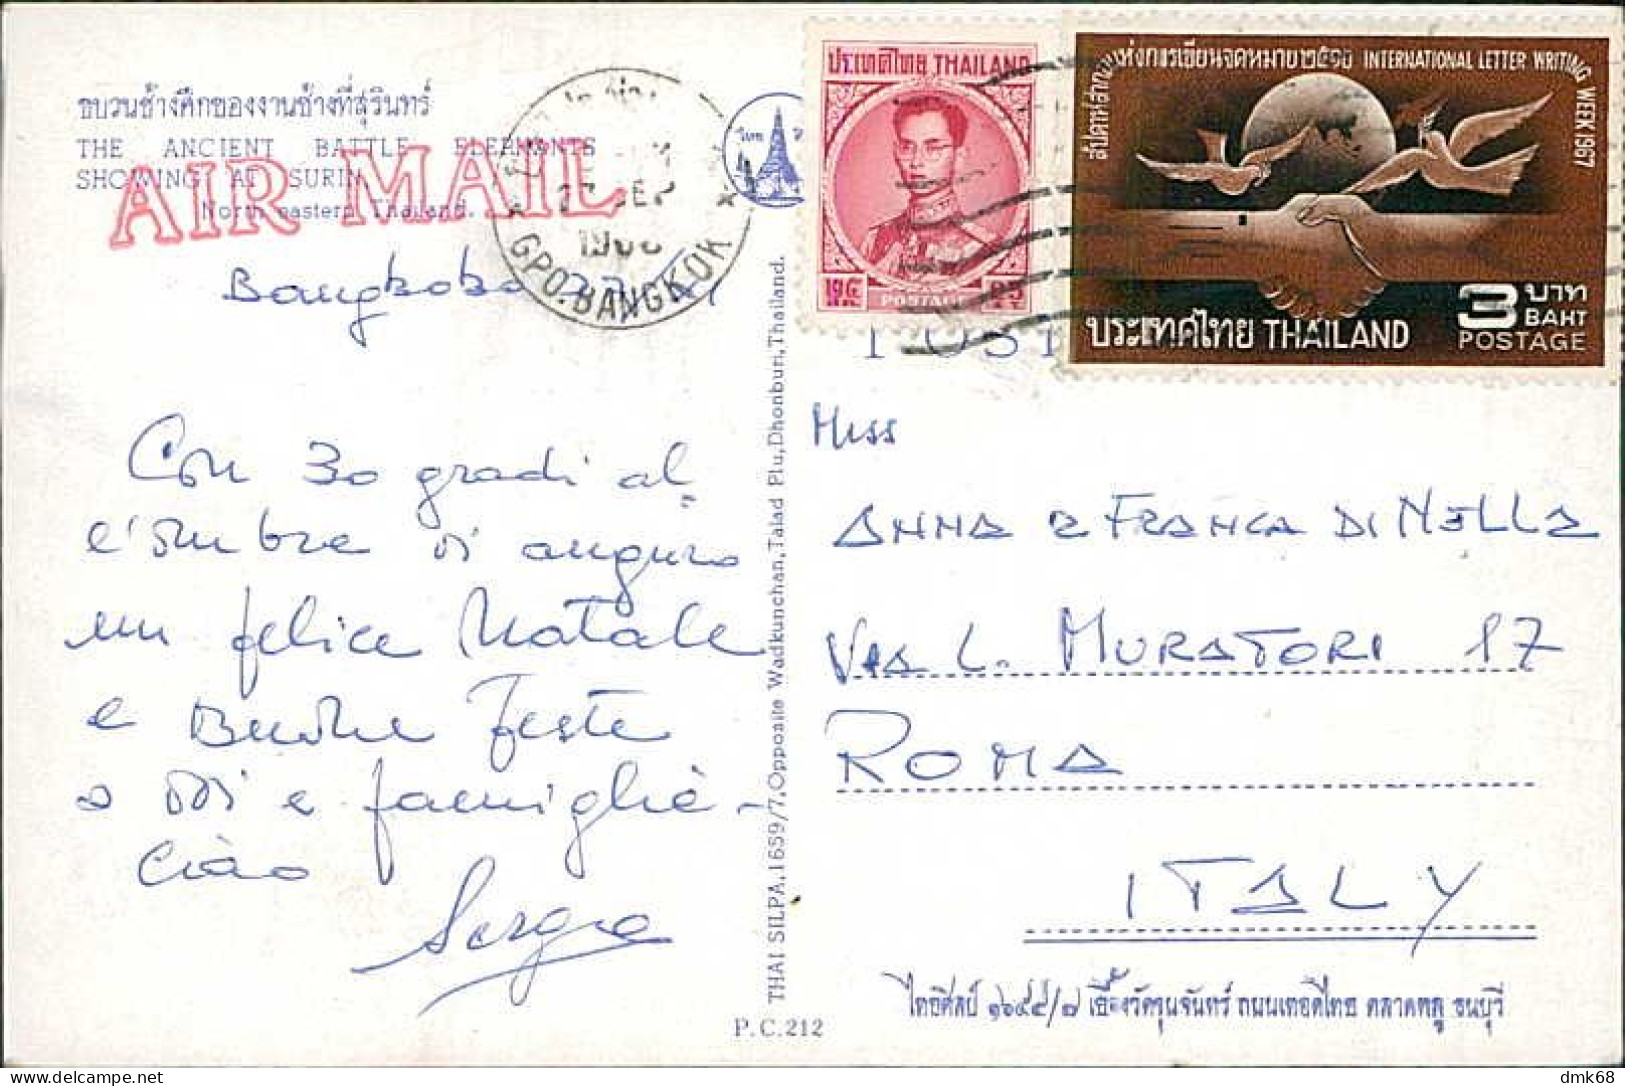 THAILAND - THE ANCIENT BATTLE ELEPHANTS - MAILED TO ITALY - STAMP INTERNATION LETTER WRITTING WEEK 1967 (16592) - Thaïlande